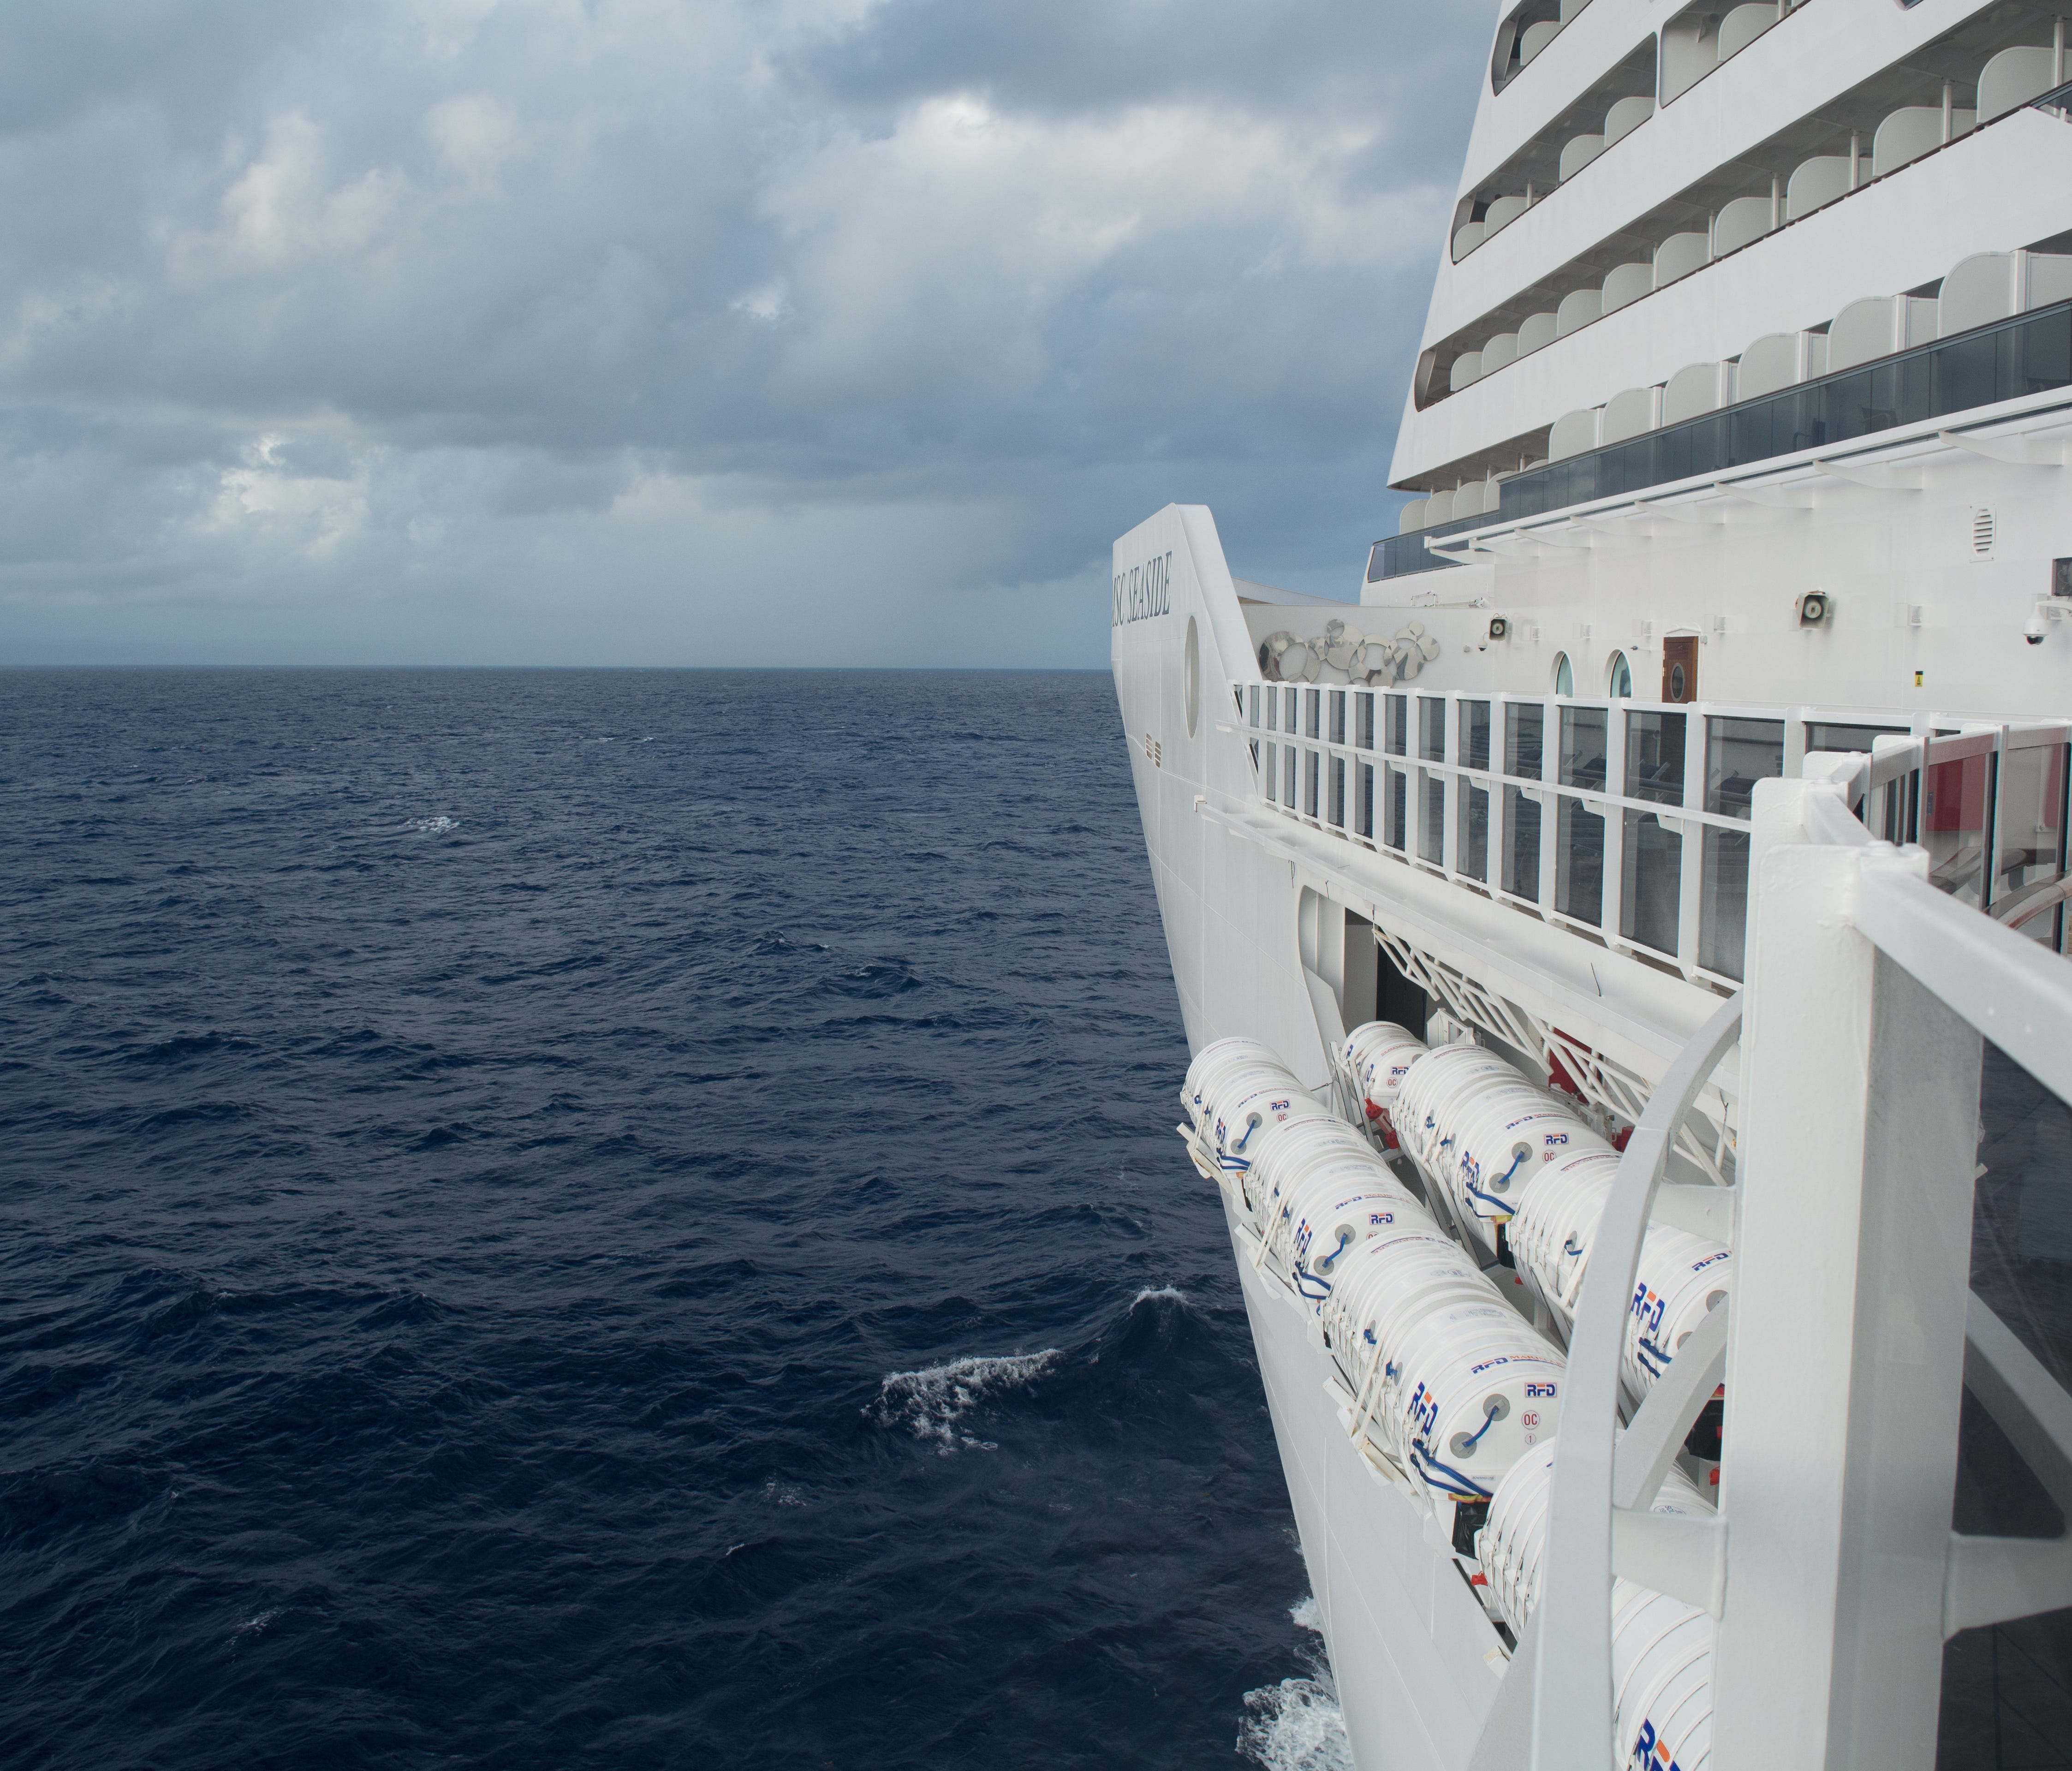 While it doesn't go all the way forward (access is restricted by the MSC Aurea Spa), it does offer a glimpse of the ship's powerful bow.